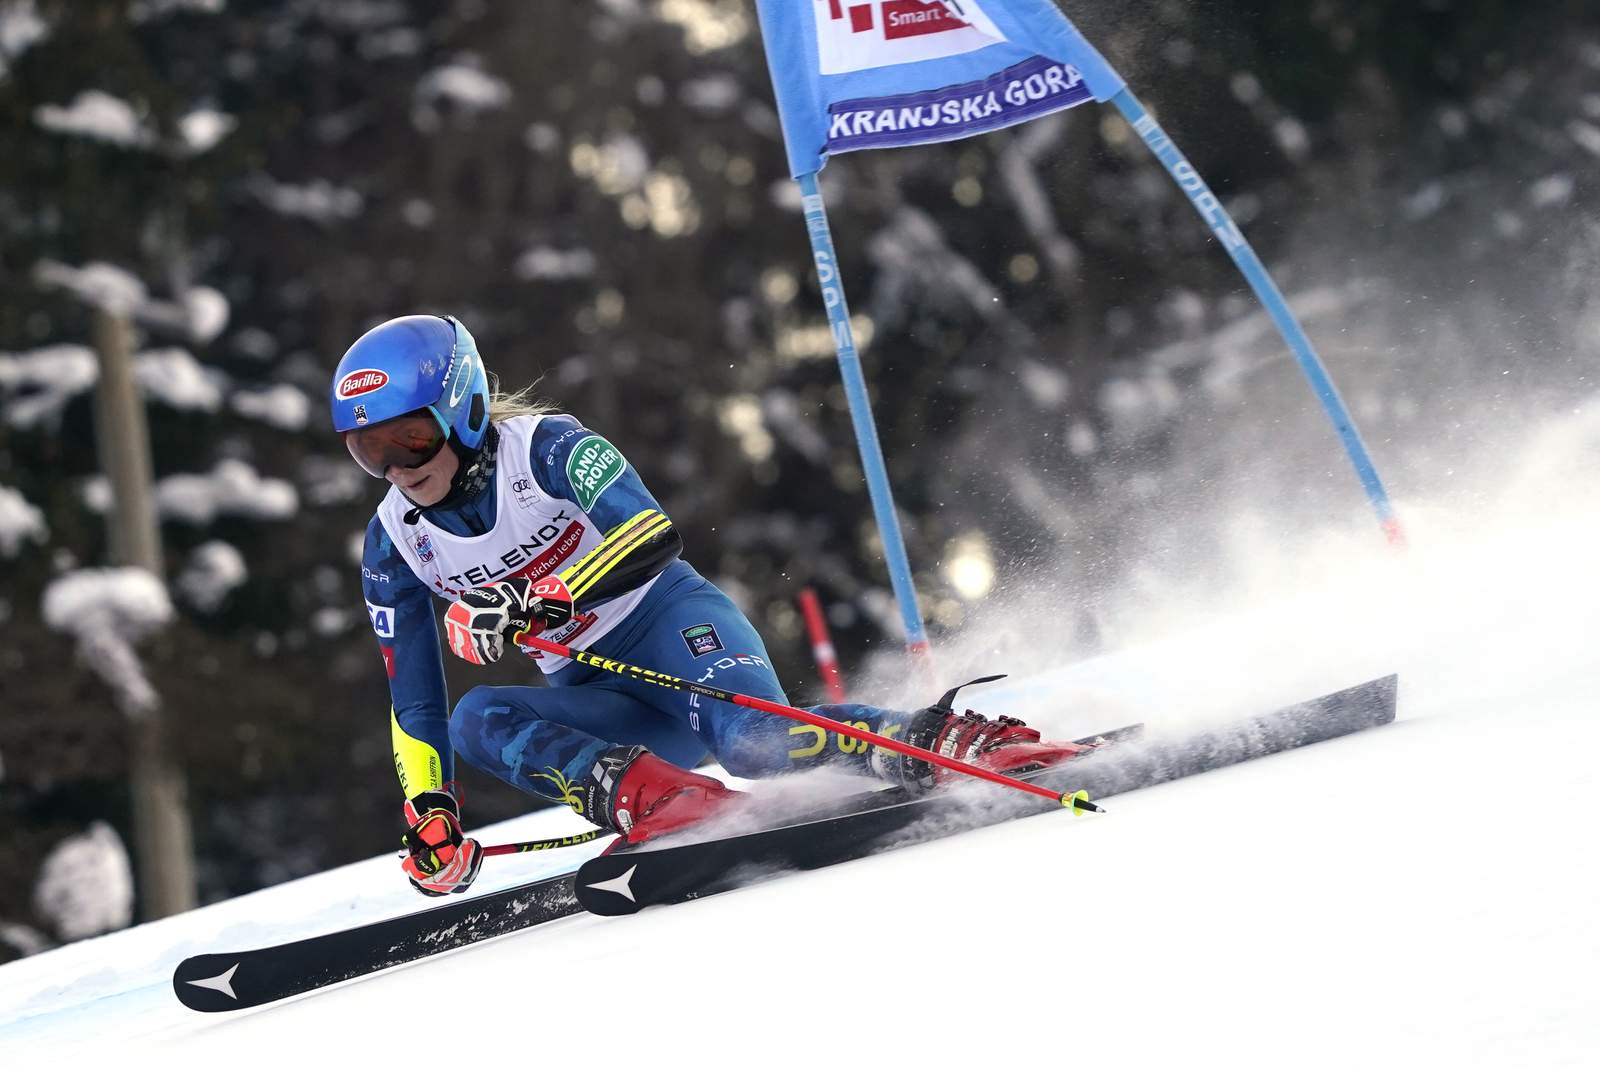 Shiffrin takes clear lead in GS after 1st run, Bassino 2nd